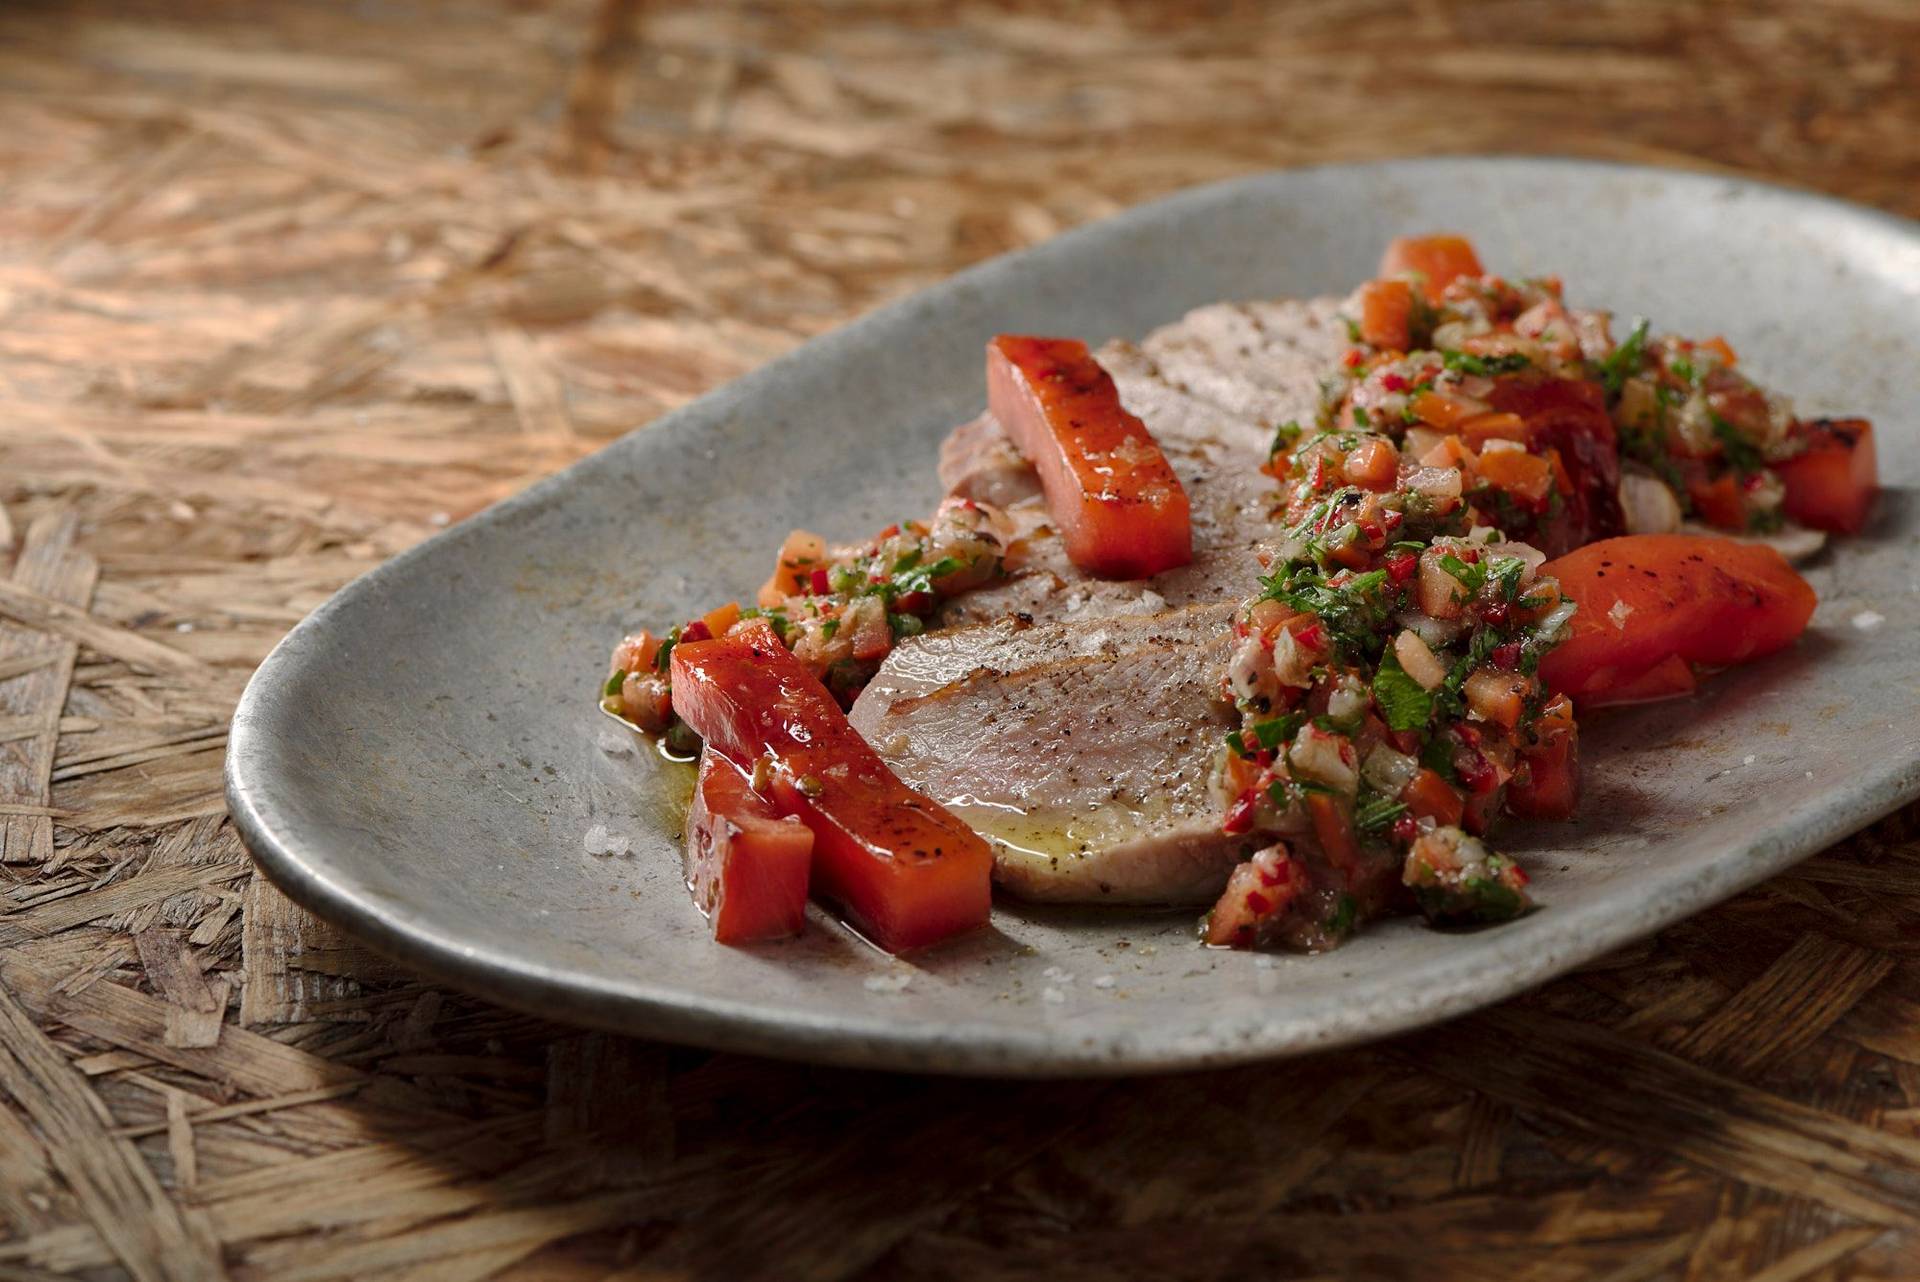 pork secreto with grilled watermelon and chimichurri on a vintage aluminum plate with wooden background